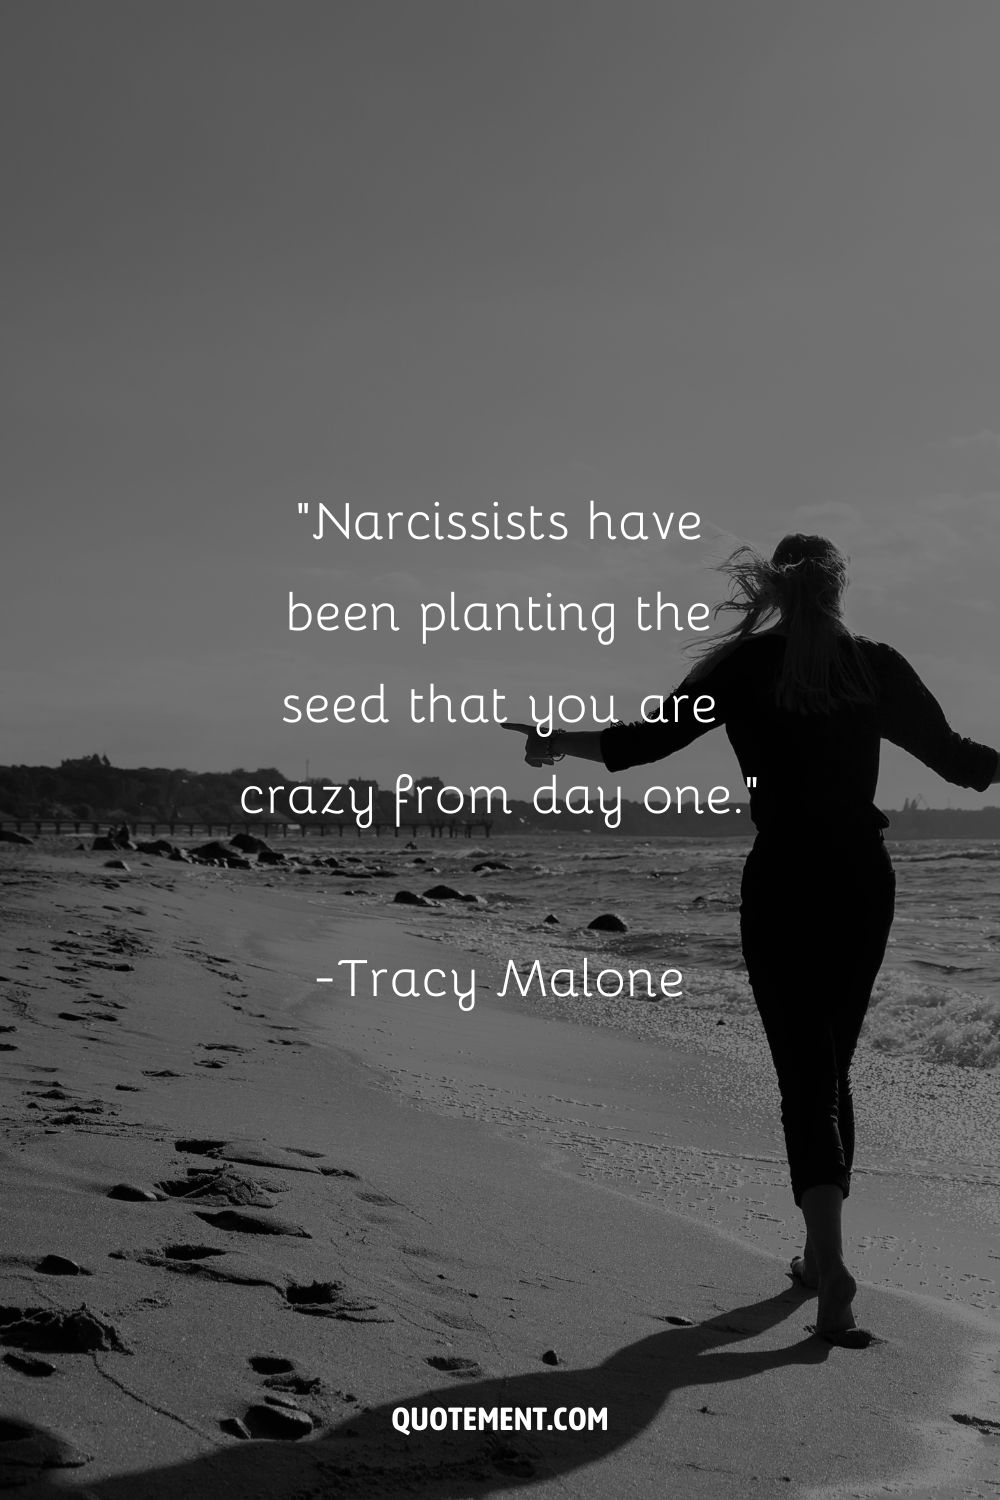 Narcissists have been planting the seed that you are crazy from day one.